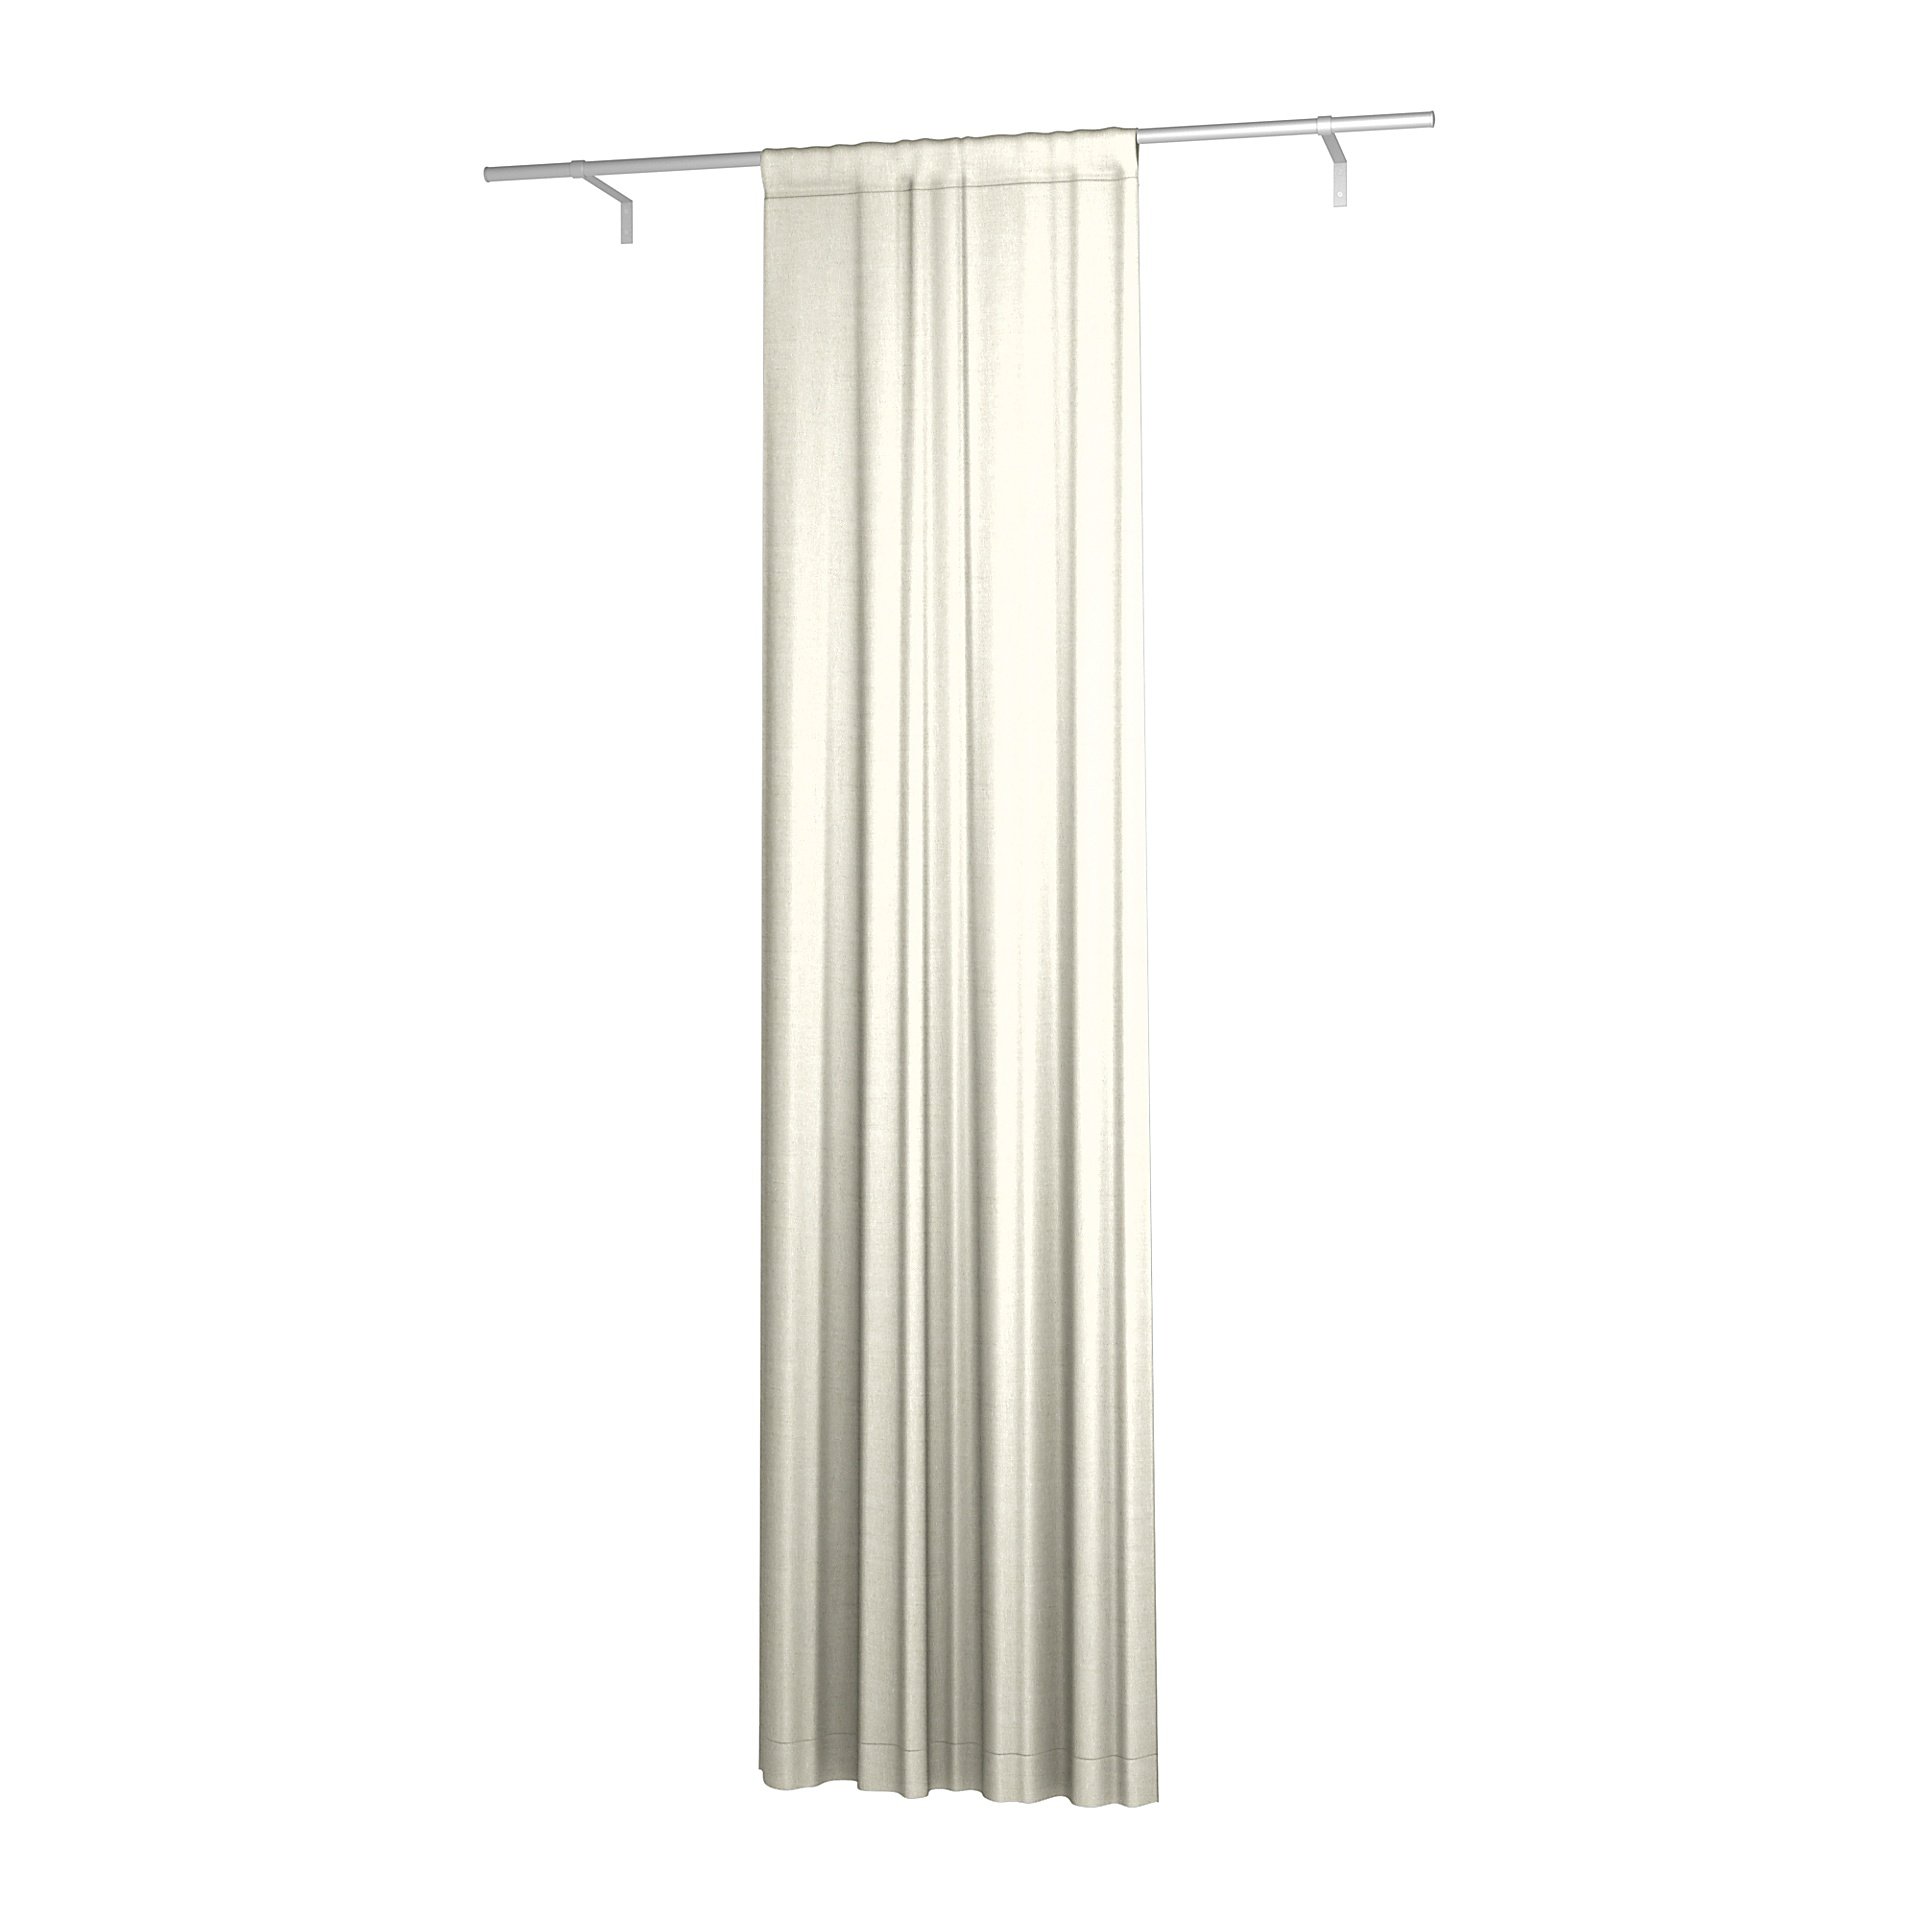 Single Width Curtain Panel with Tunnel/Creaseband, Lined, Customized, Natural, Linen - Bemz